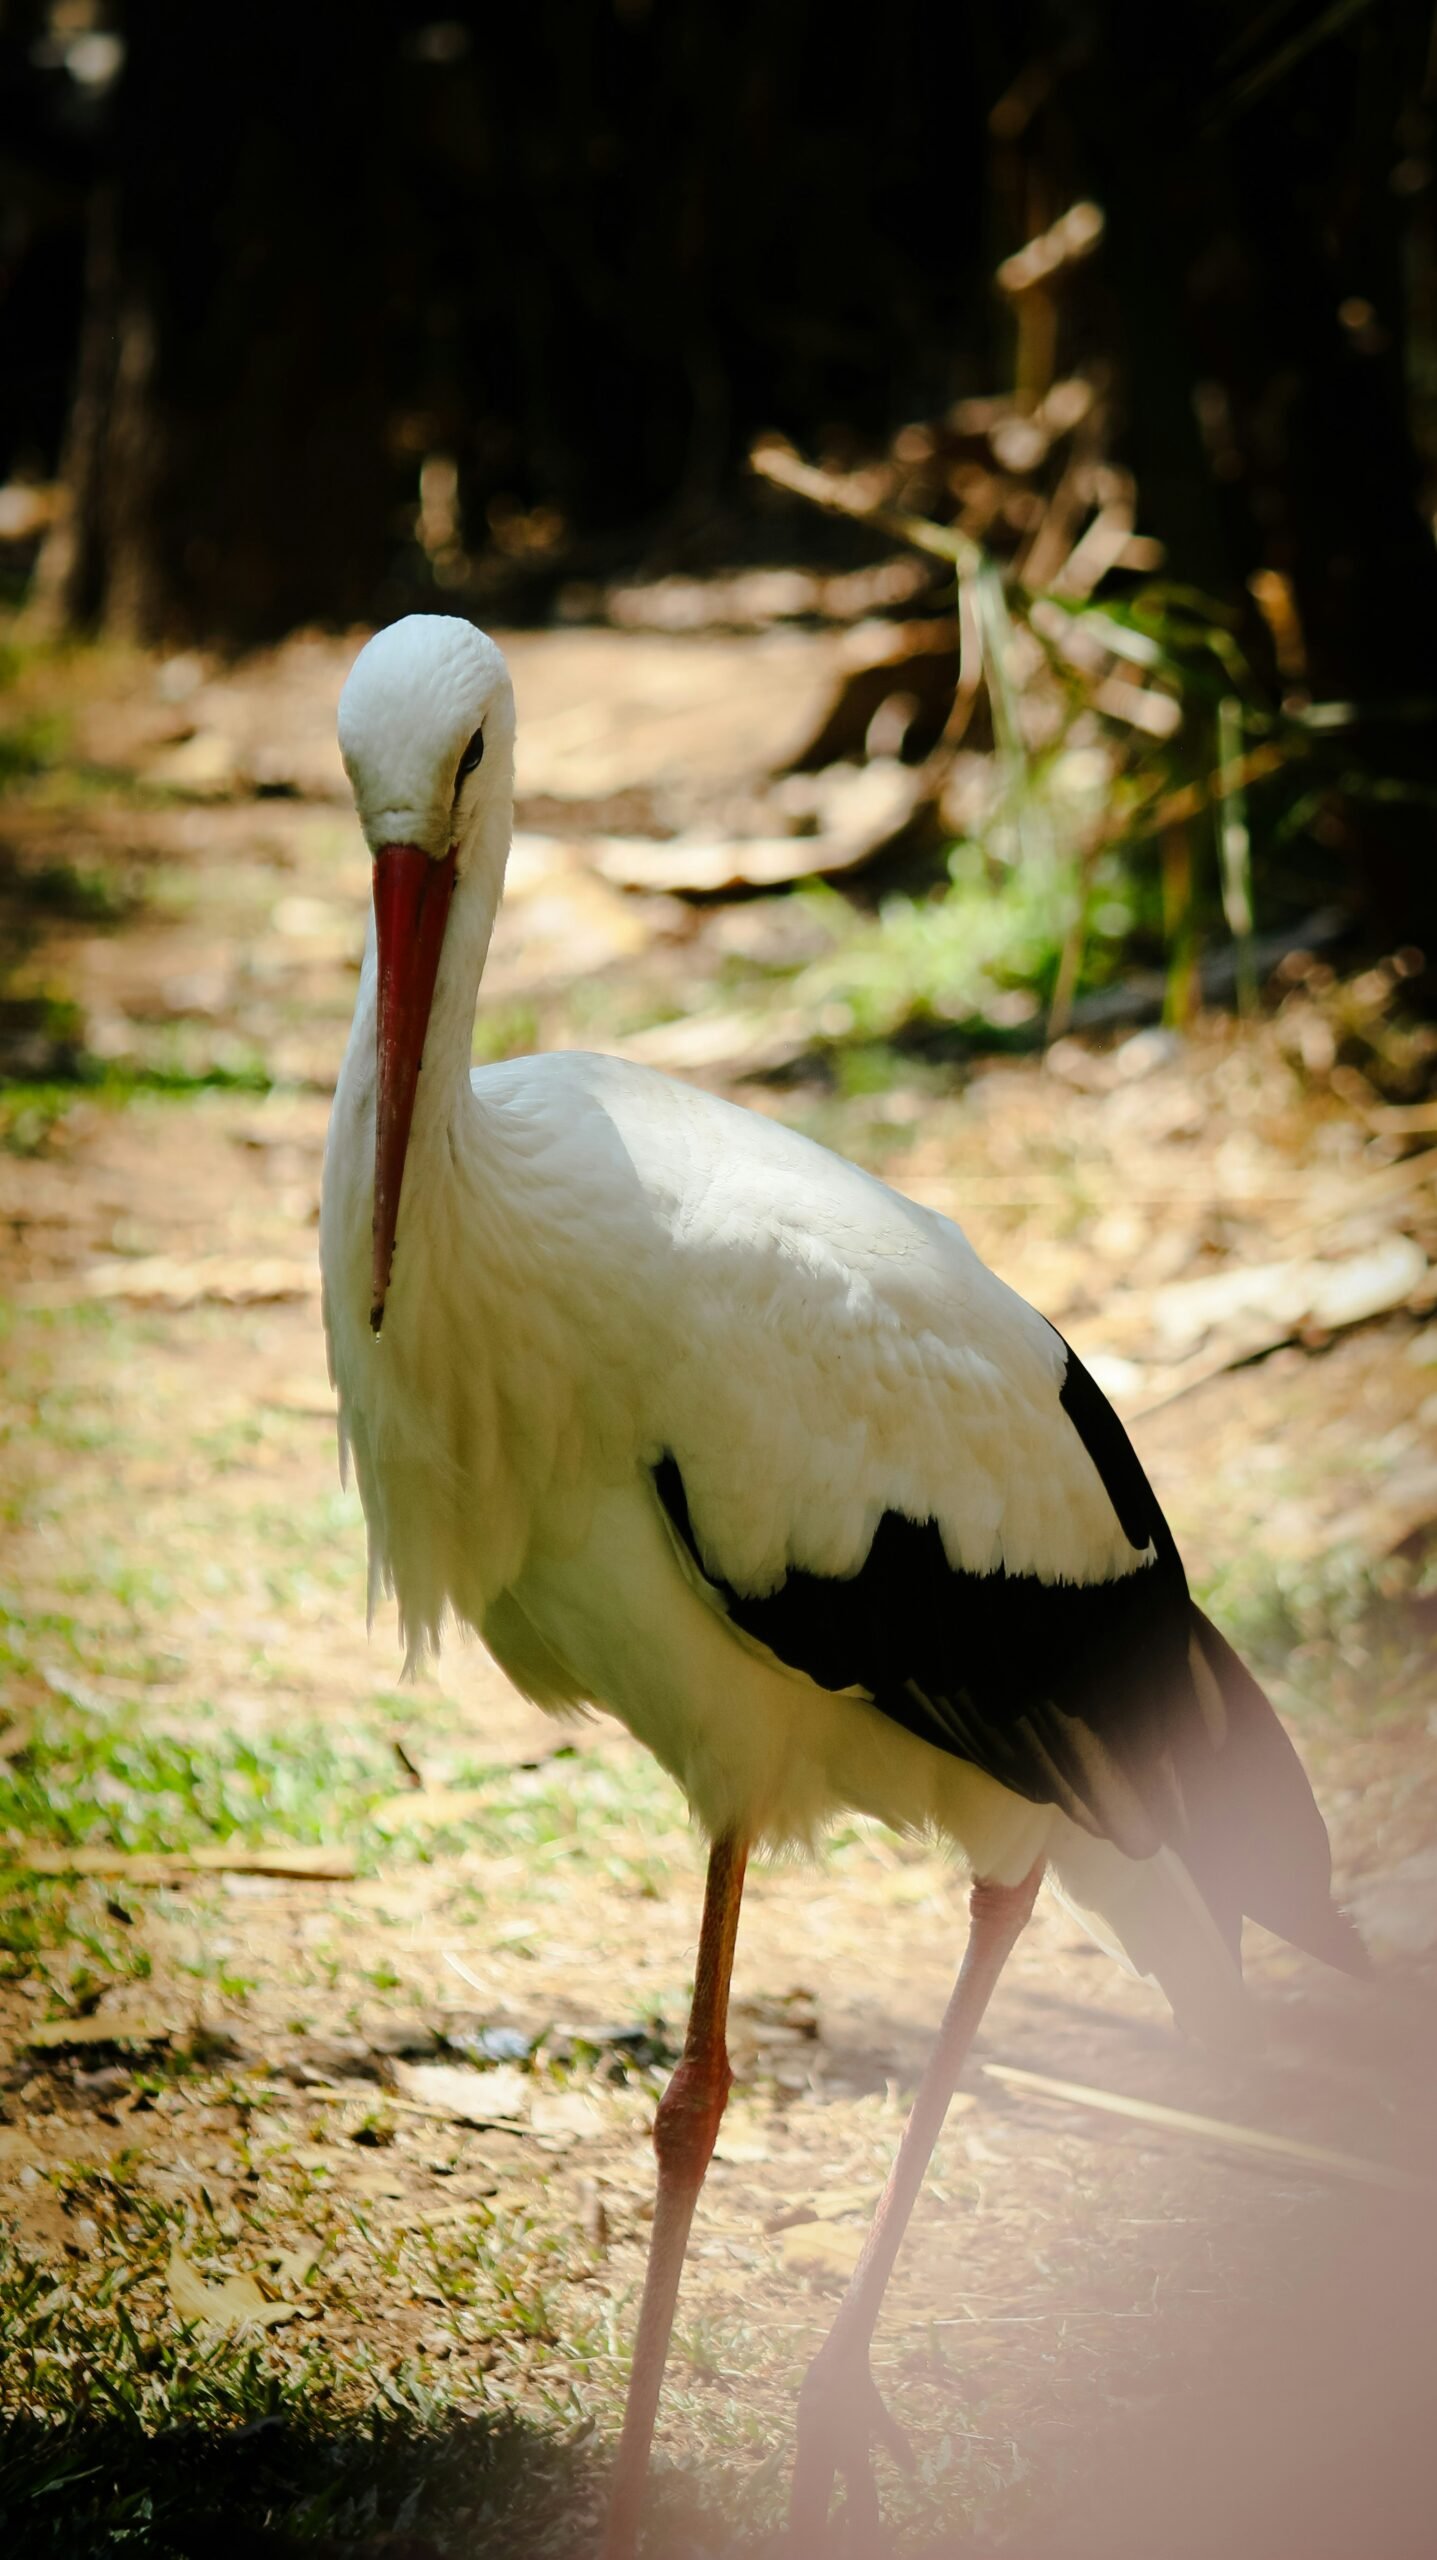 a large white and black bird with a long beak